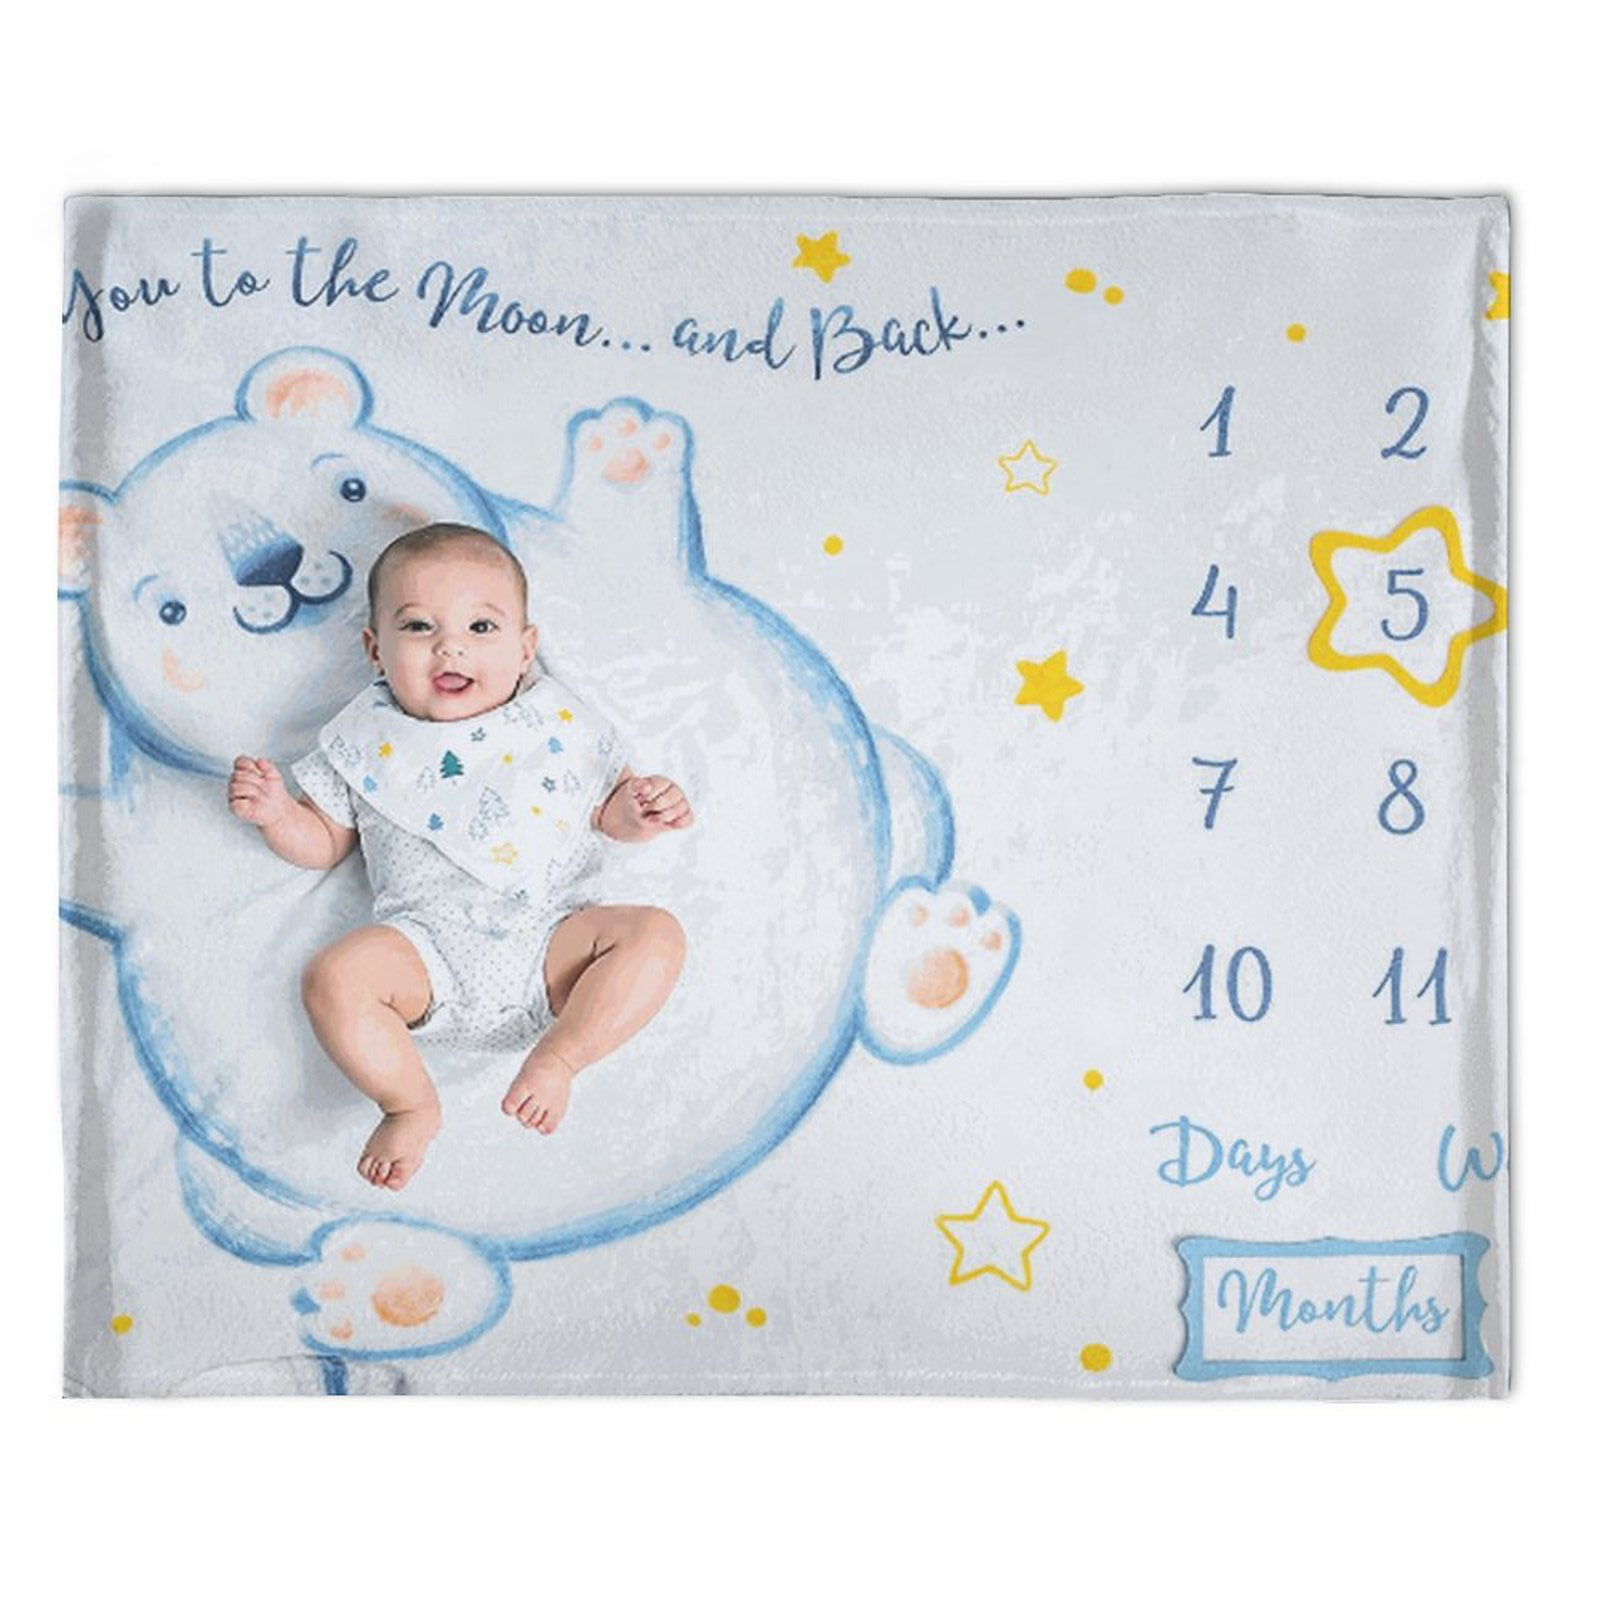 Baby Milestone Blanket Boy & Girl - Large Newborn Month Blanket - First Year Calendar - for Perfect Personalized Pictures, with Bandana Bib and Frames, Super Soft - by Noy&Molly